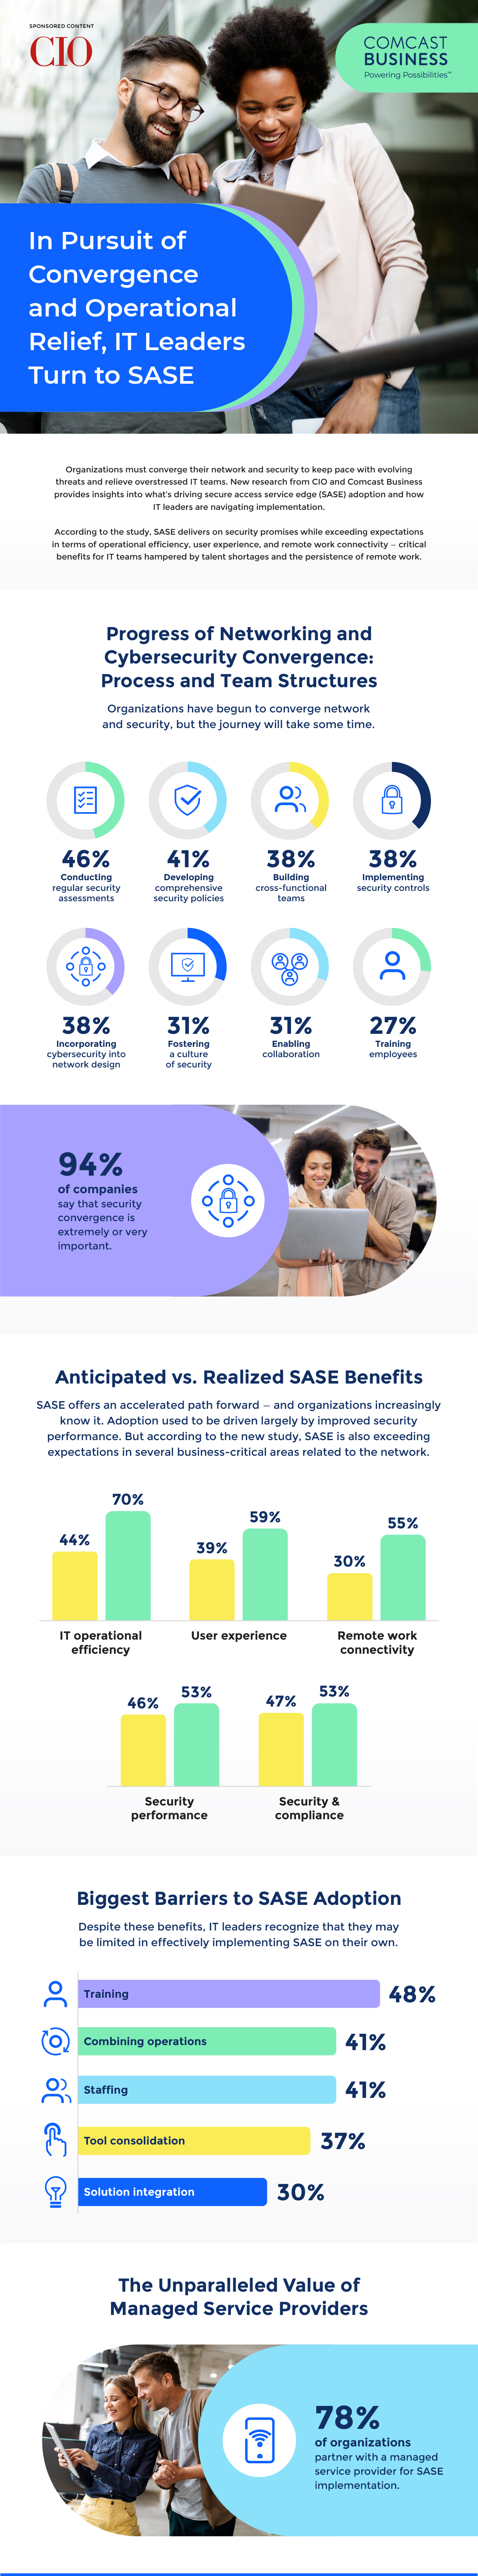  In Pursuit of Convergence and Operational Relief, IT Leaders Turn to SASE Infographic